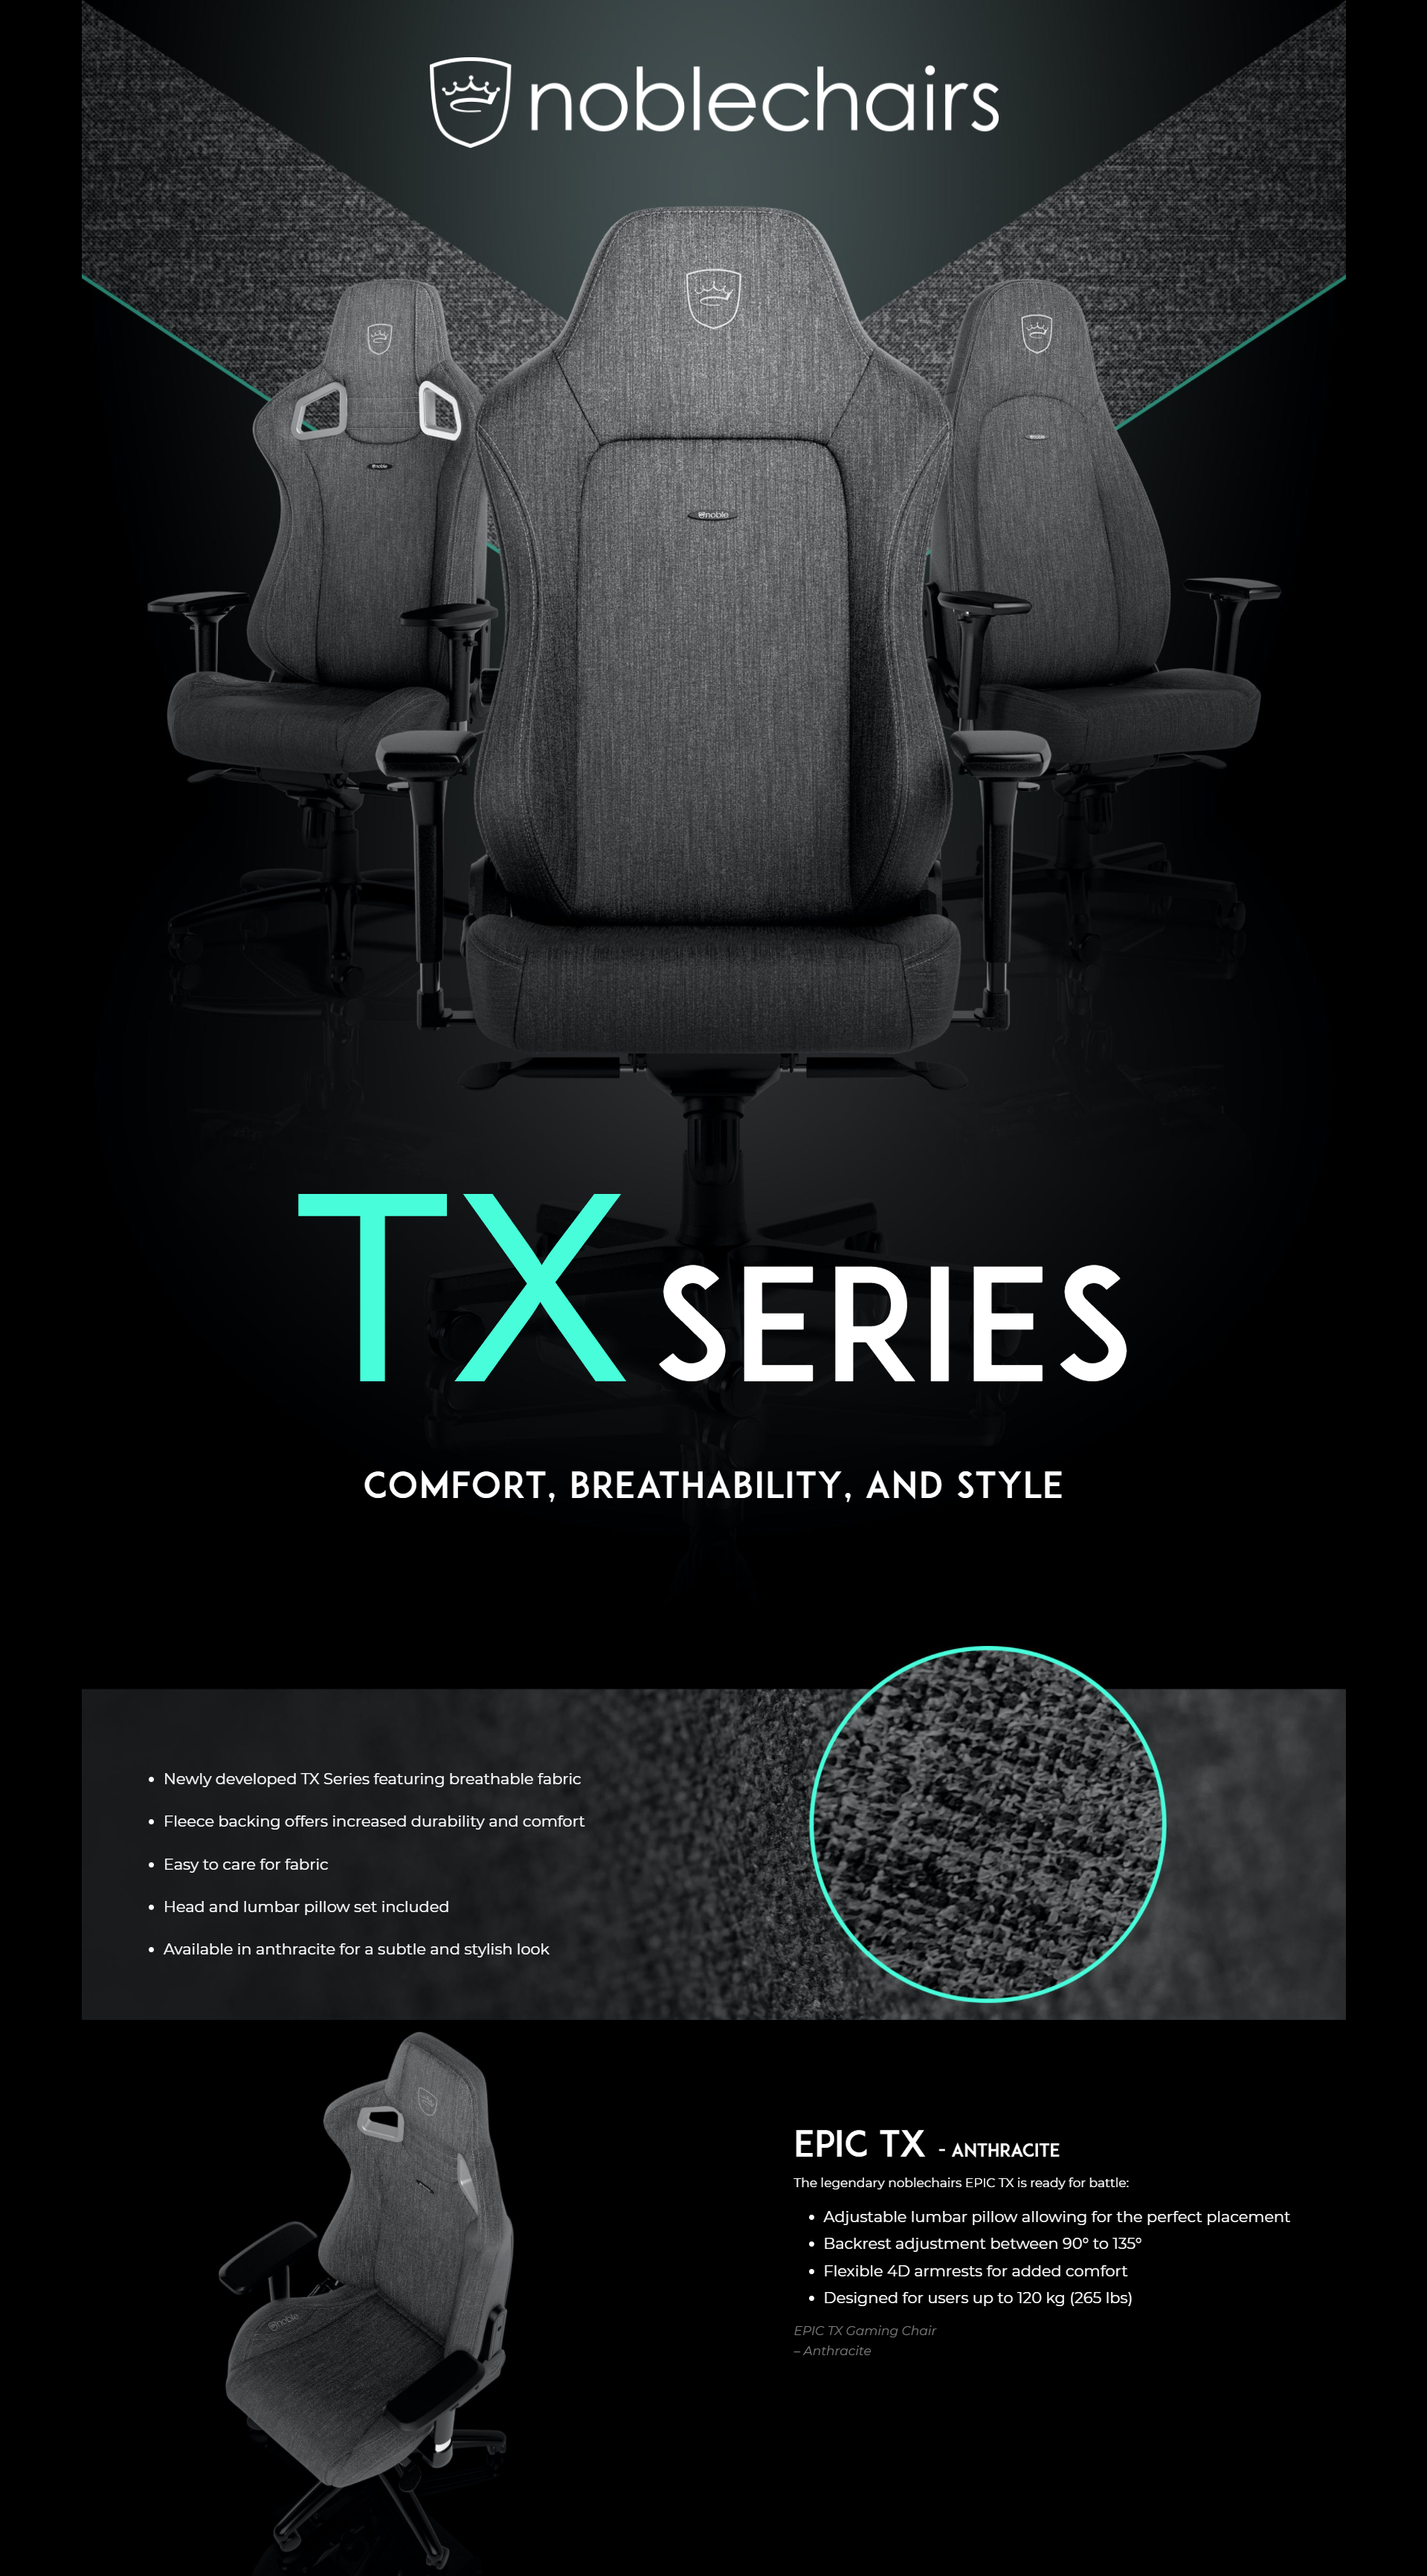 screencapture-noblechairs-pages-tx-series-2021-11-20-01_01_12.png